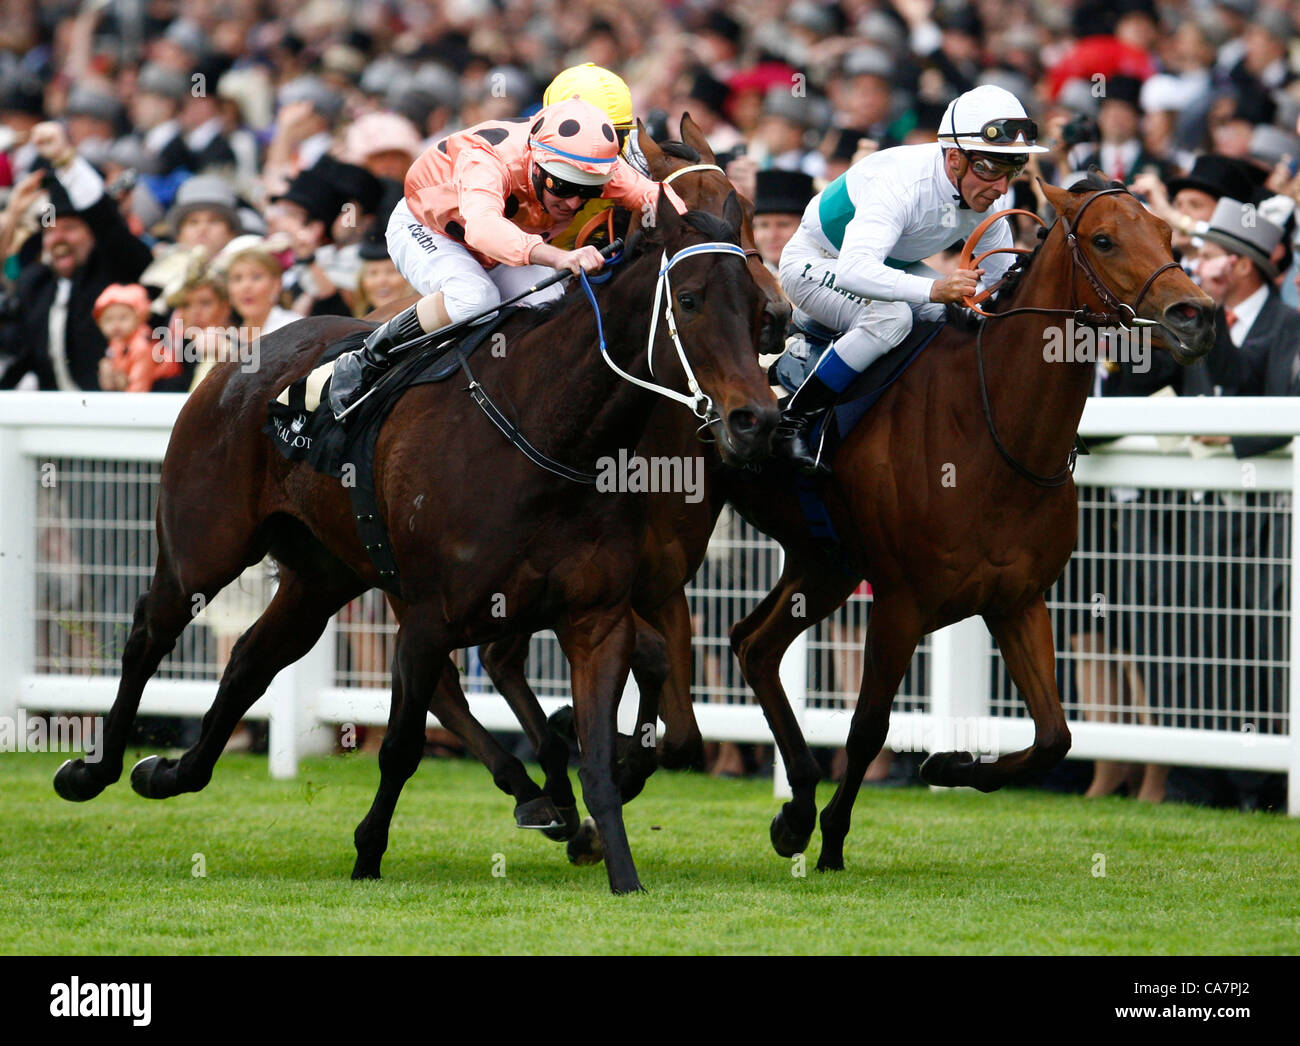 23.06.2012 Ascot, Windsor, ENGLAND, UK:  Luke Nolan on Black Cavier going pass the winning post just beating Thiery Janet on Moonlight Cloud at The Hardwicke Stakes during Royal Ascot Festival. Stock Photo